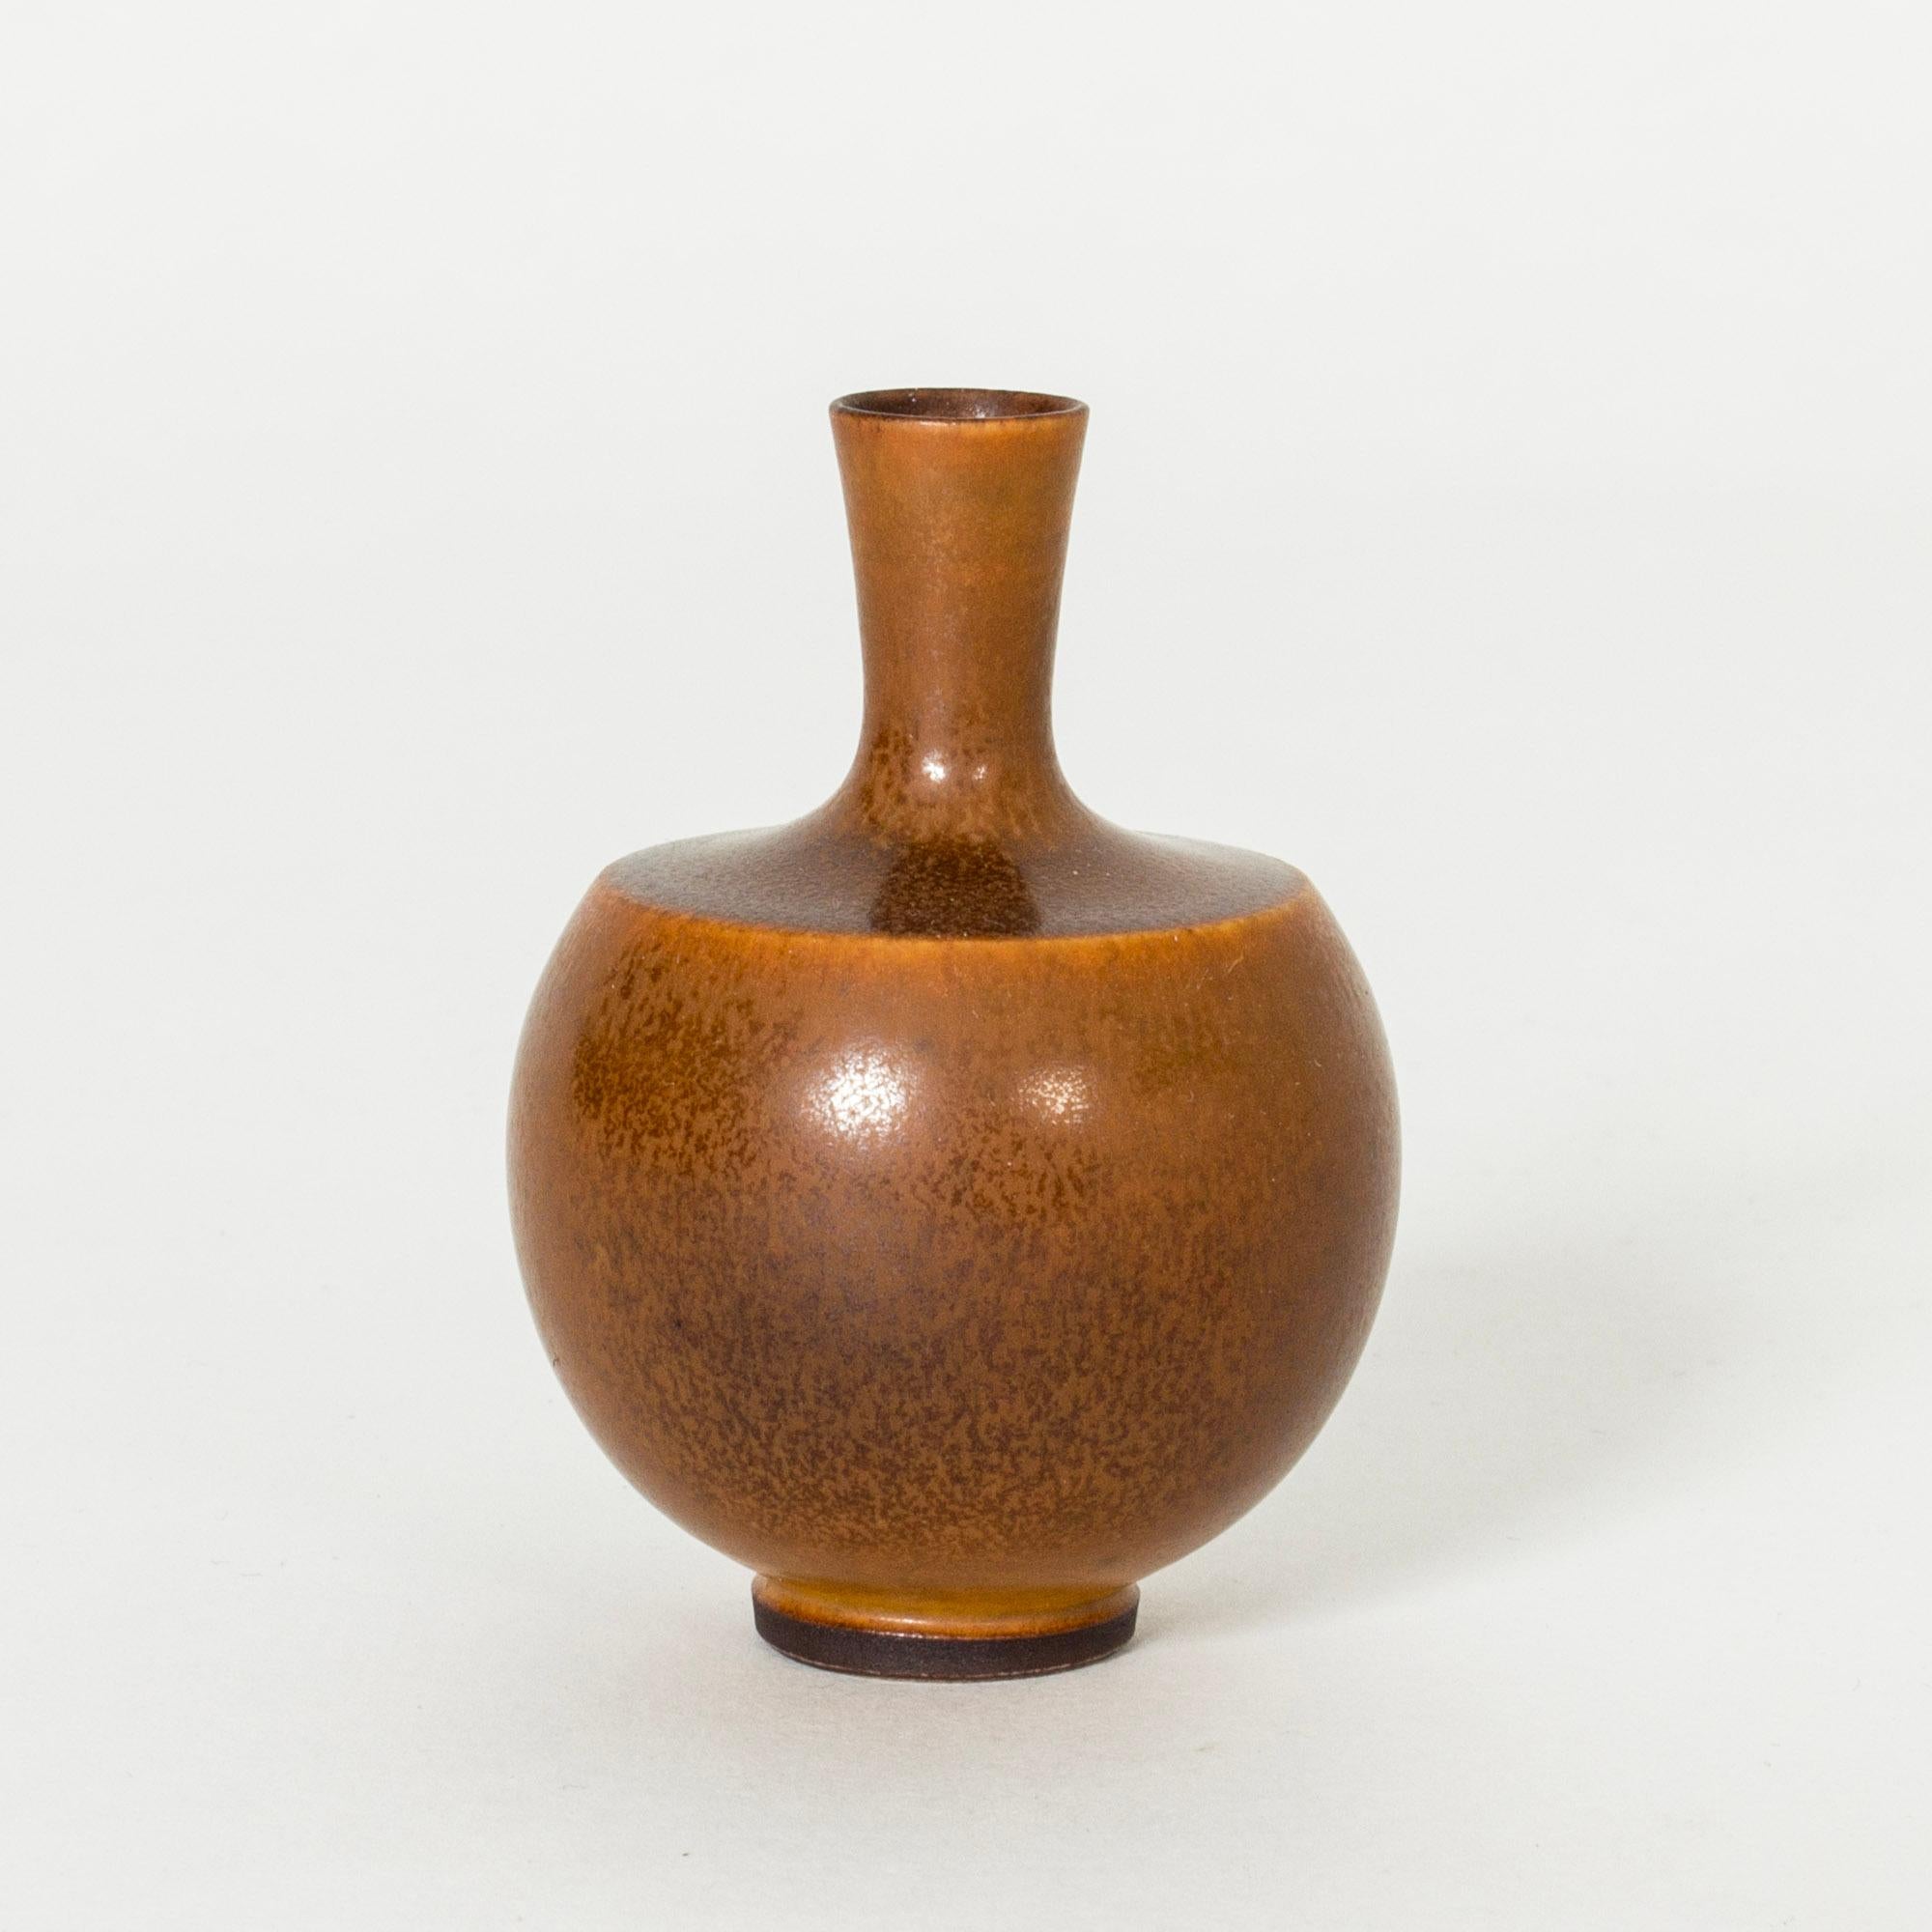 Lovely tiny stoneware vase by Berndt Friberg, in a compact form with rich brown hare’s fur glaze.

Berndt Friberg was a Swedish ceramicist, renowned for his stoneware vases and vessels for Gustavsberg. His pure, composed designs with satiny,